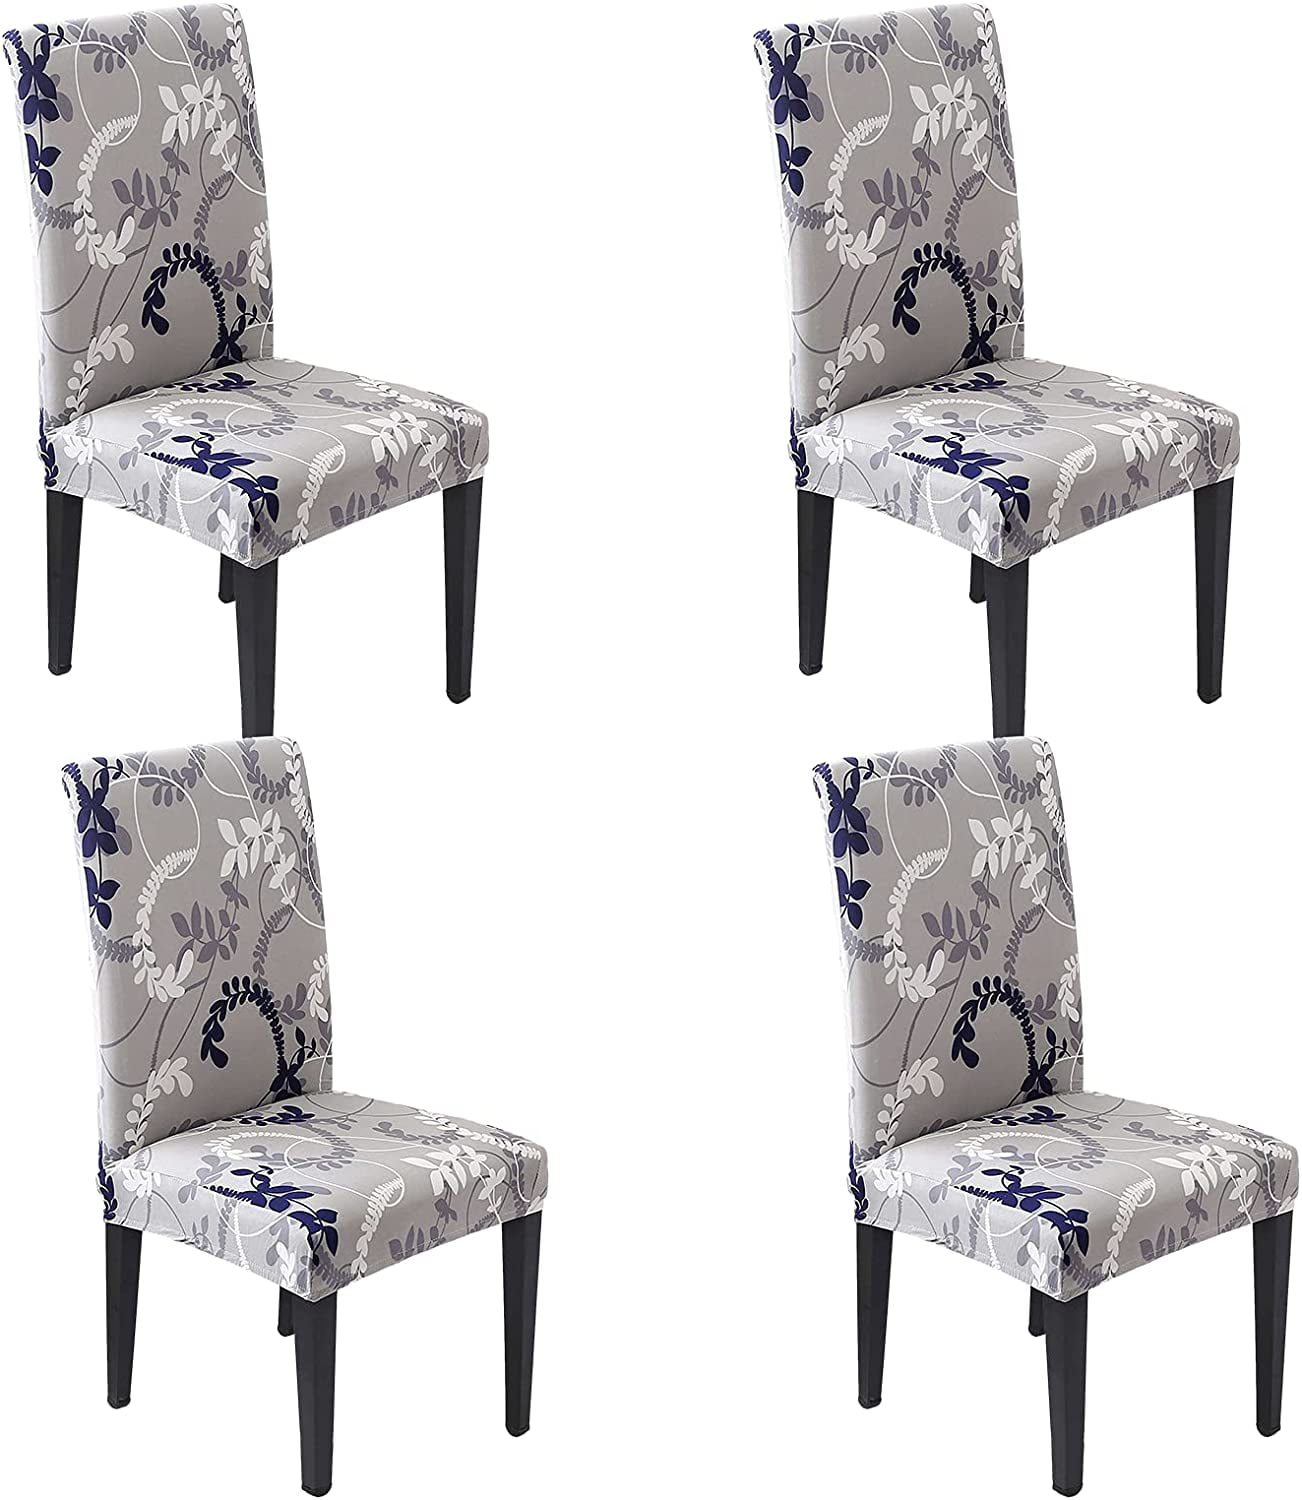 4x Slipcover Dining Chair Chairs Slip Covers Removable Stretch Elastic Protector 